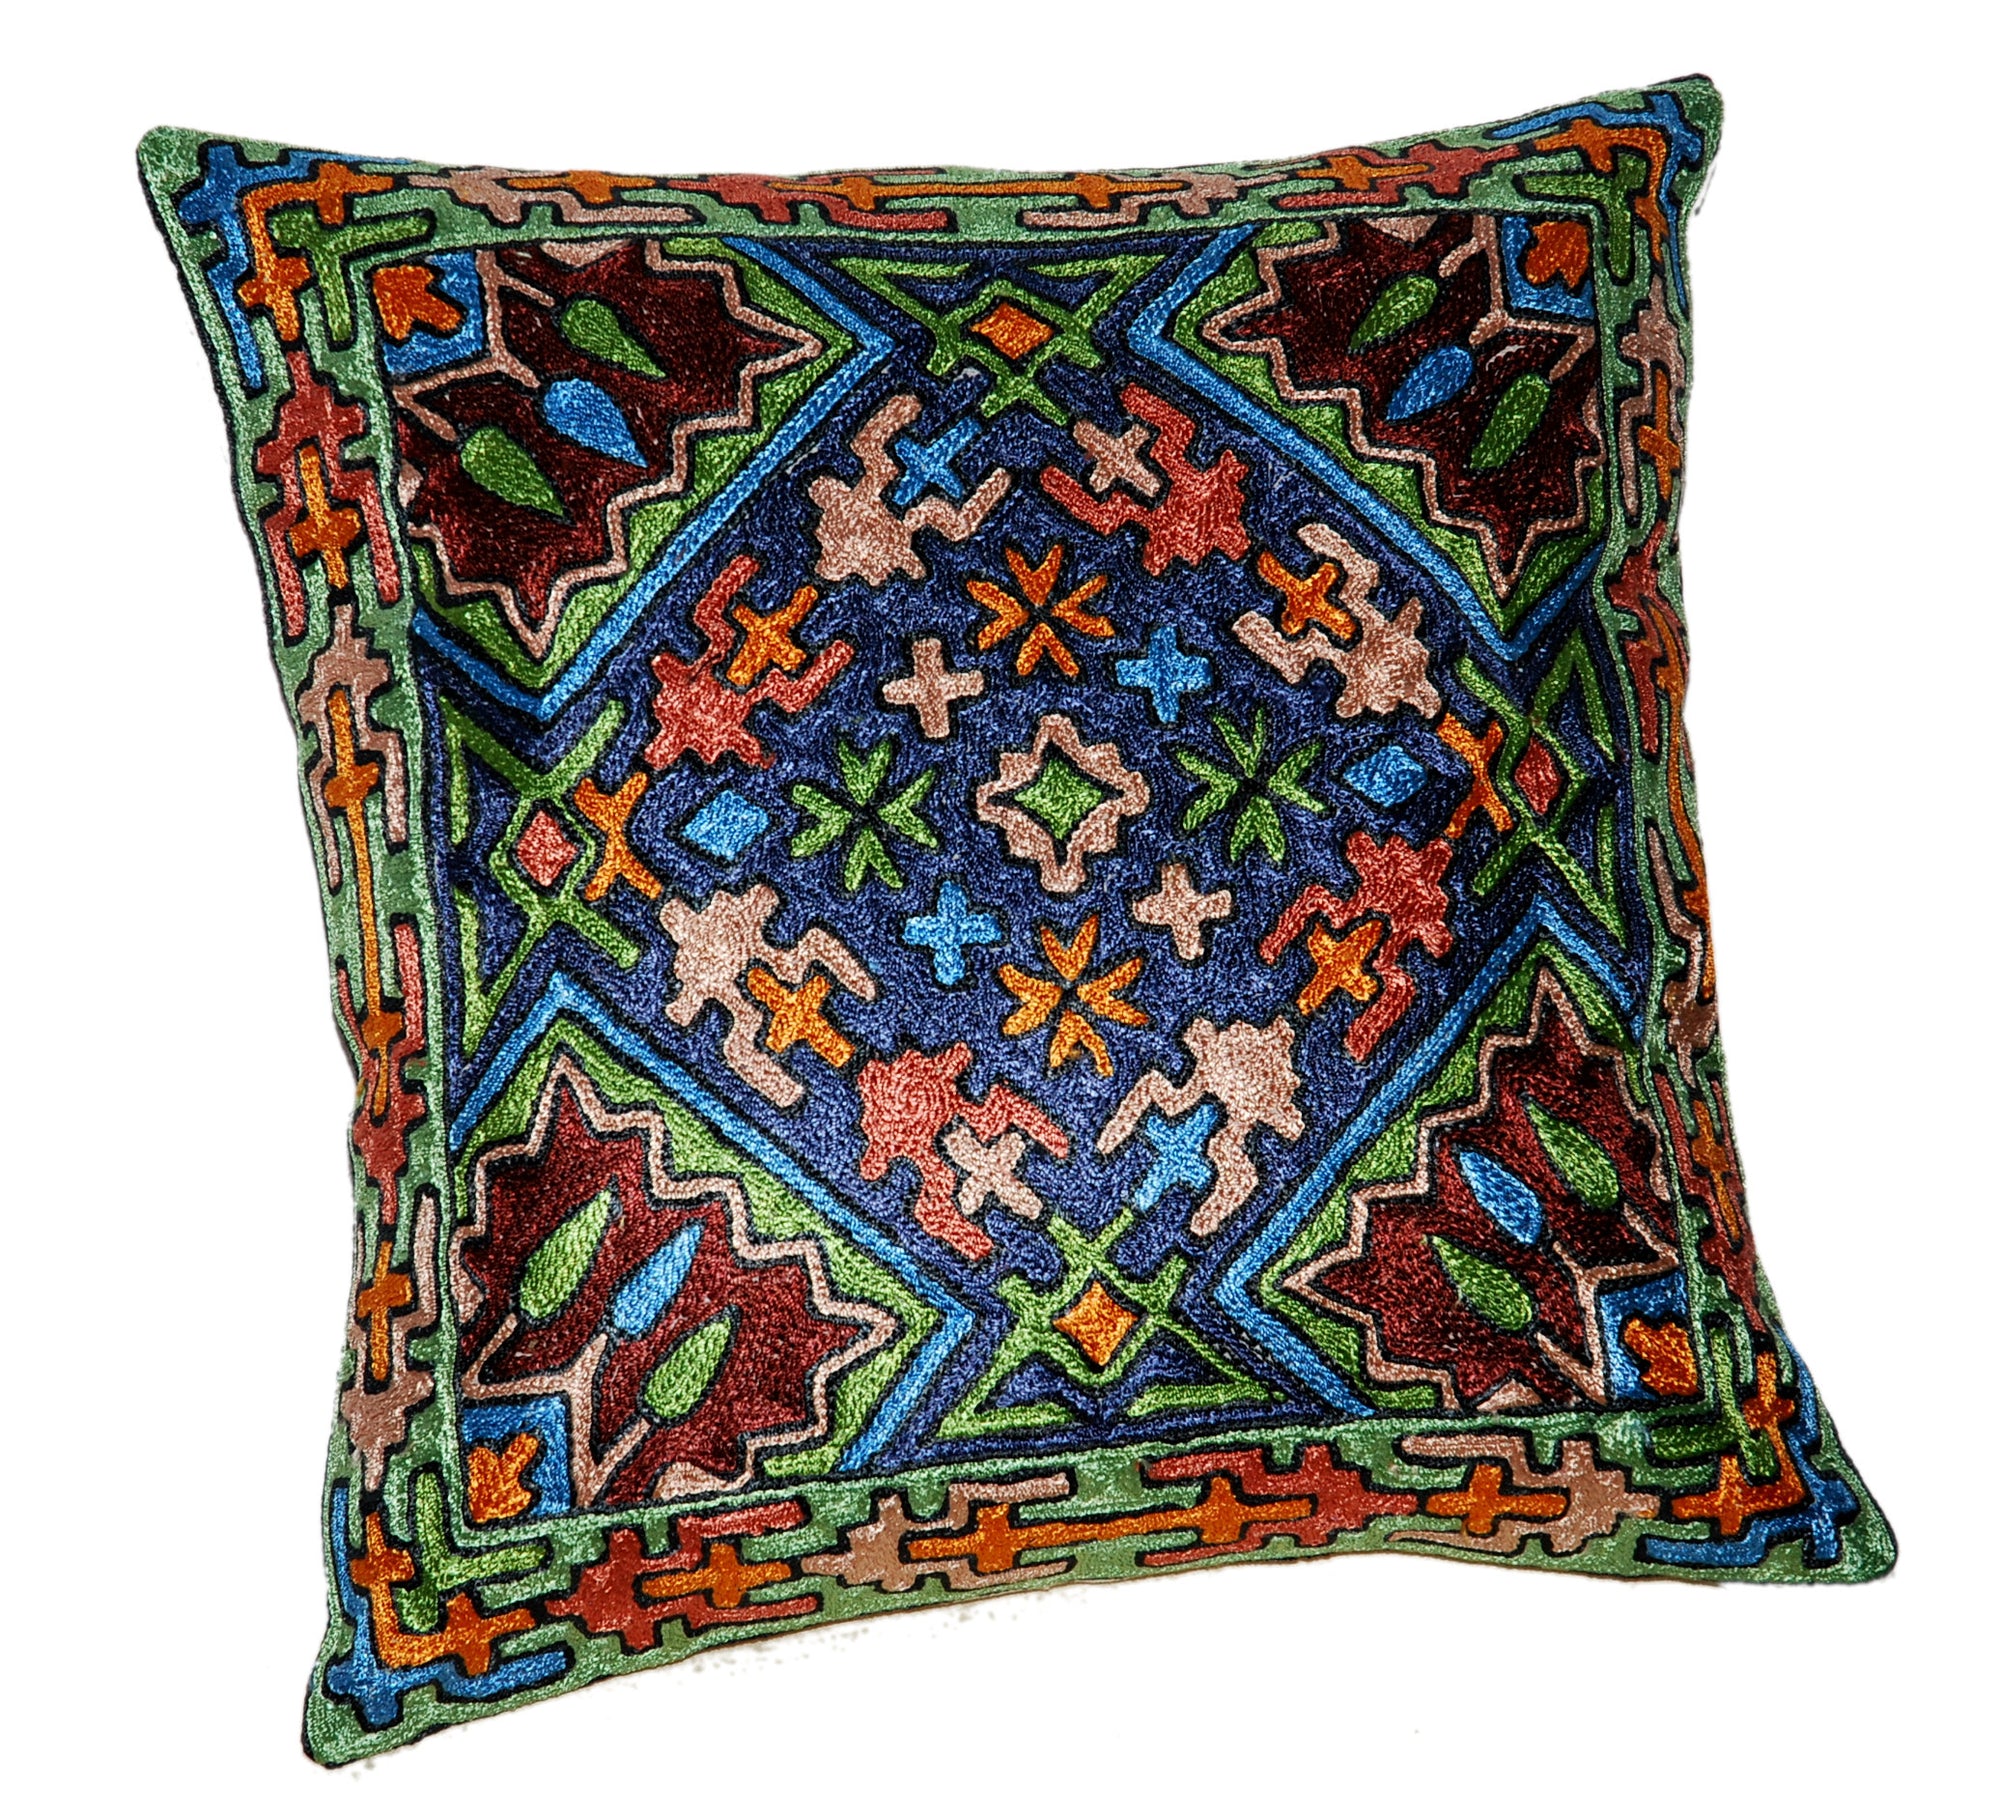 Crewel Silk Embroidered Cushion Throw Pillow Cover, Multicolor #CW2017